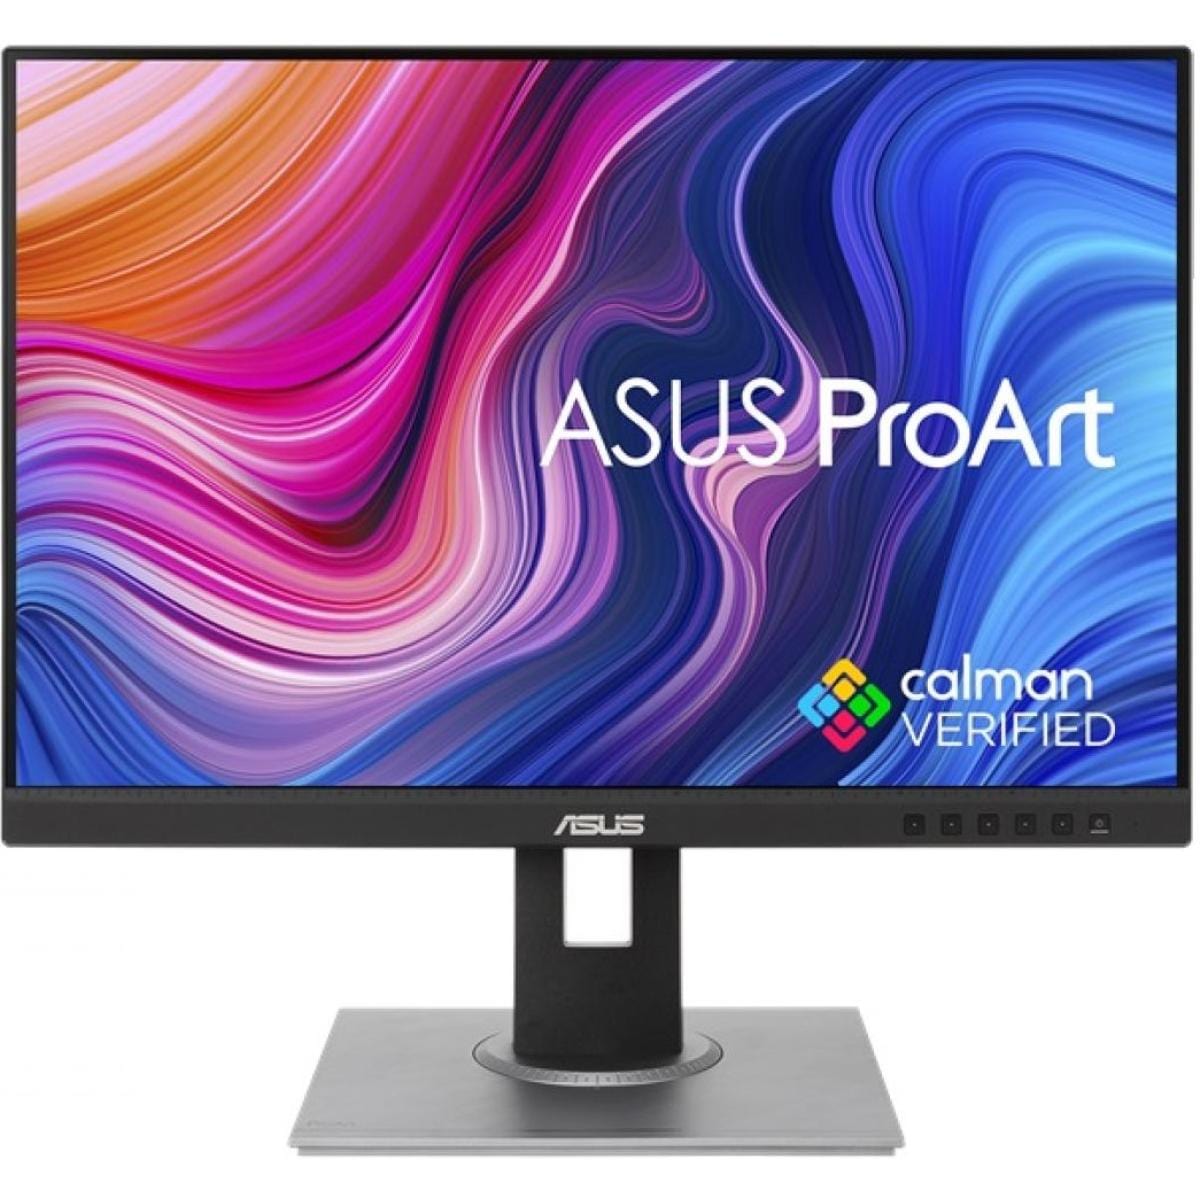 ASUS Computer Monitors ASUS ProArt PA278QV 27'' Professional IPS Monitor-WQHD (2560X1440) 75Hz,100% sRGB ,Full Adjustable Stand,Built in Speakers